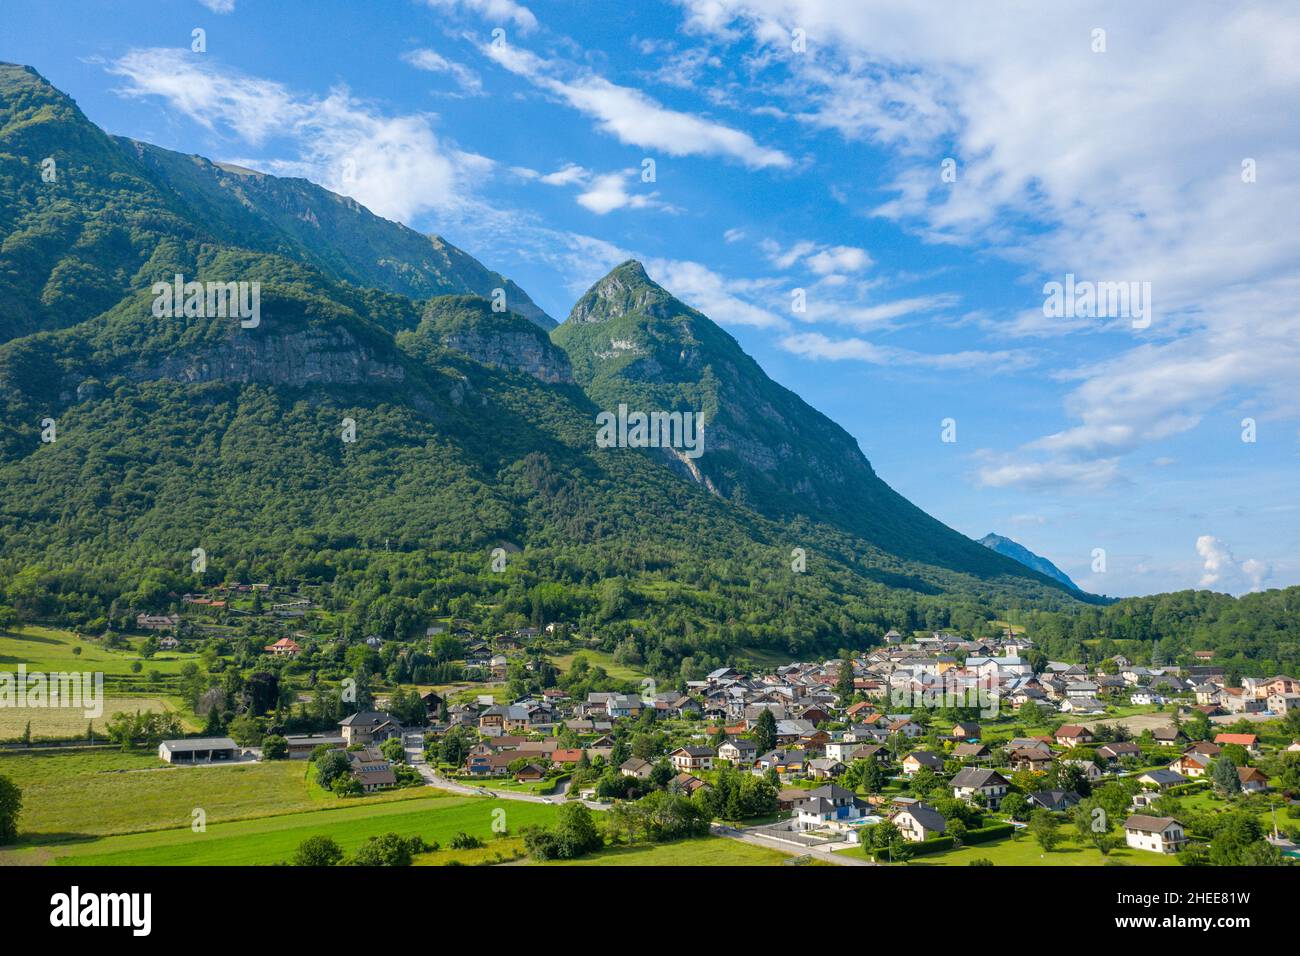 This landscape photo was taken in Europe, in France, in Isere, in the Alps, in summer. We can see the city of Gresy sur Isere under its mountain, unde Stock Photo